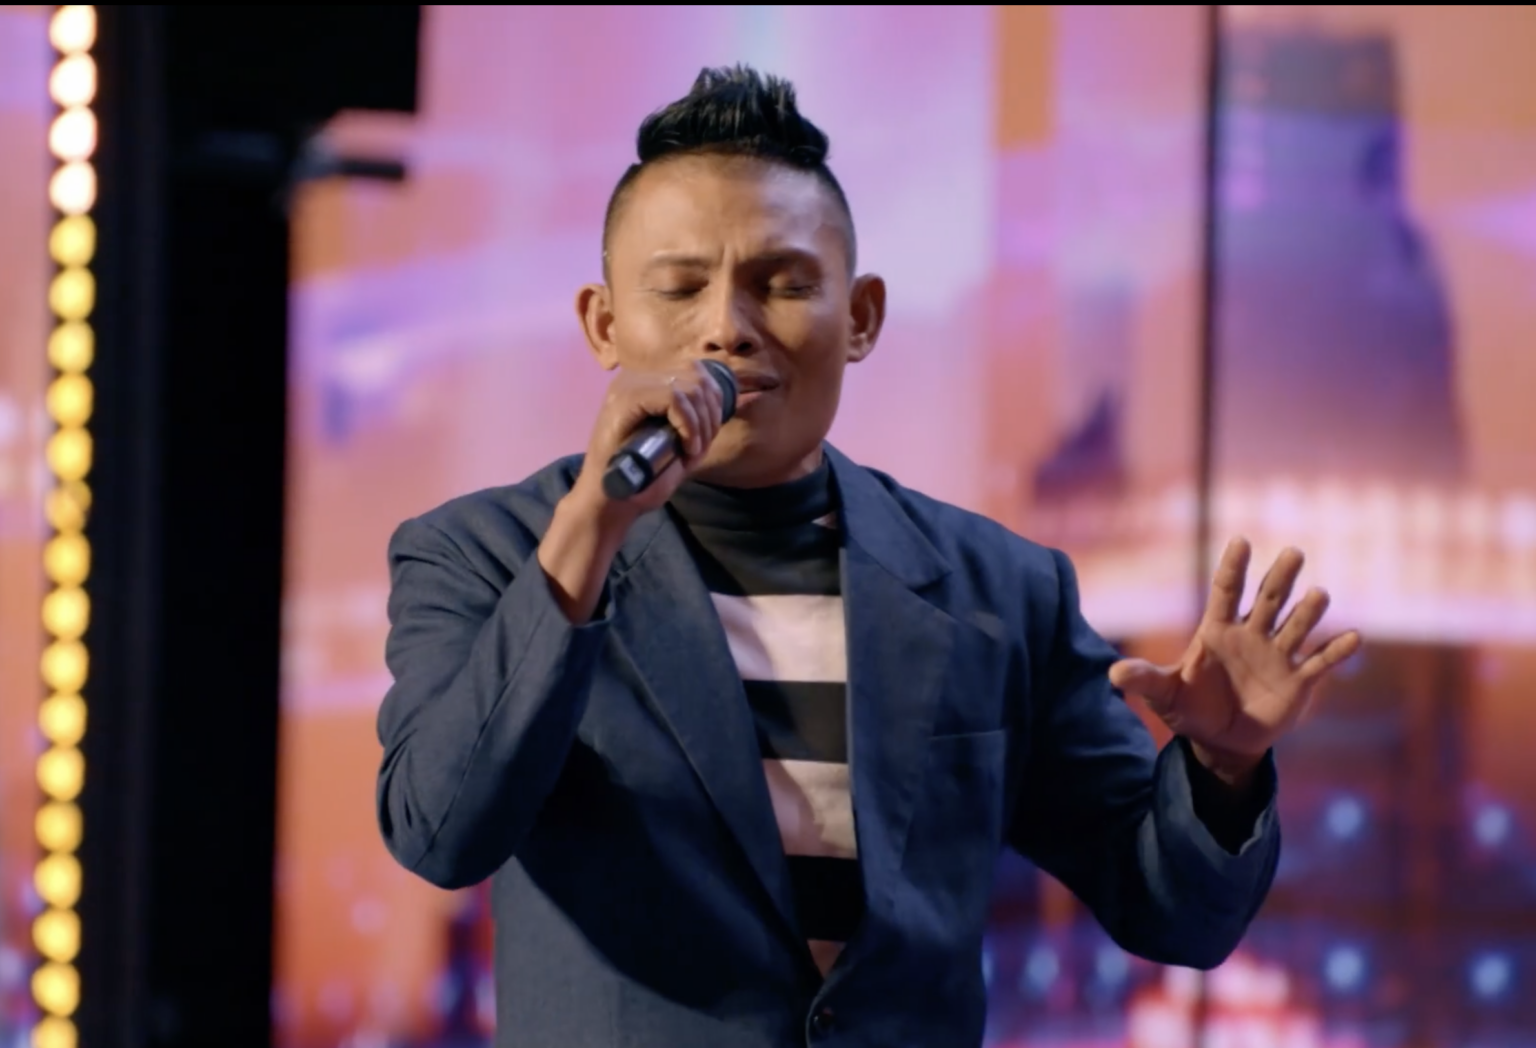 Cebuano singer owns AGT stage, earns standing ovation from all 4 judges